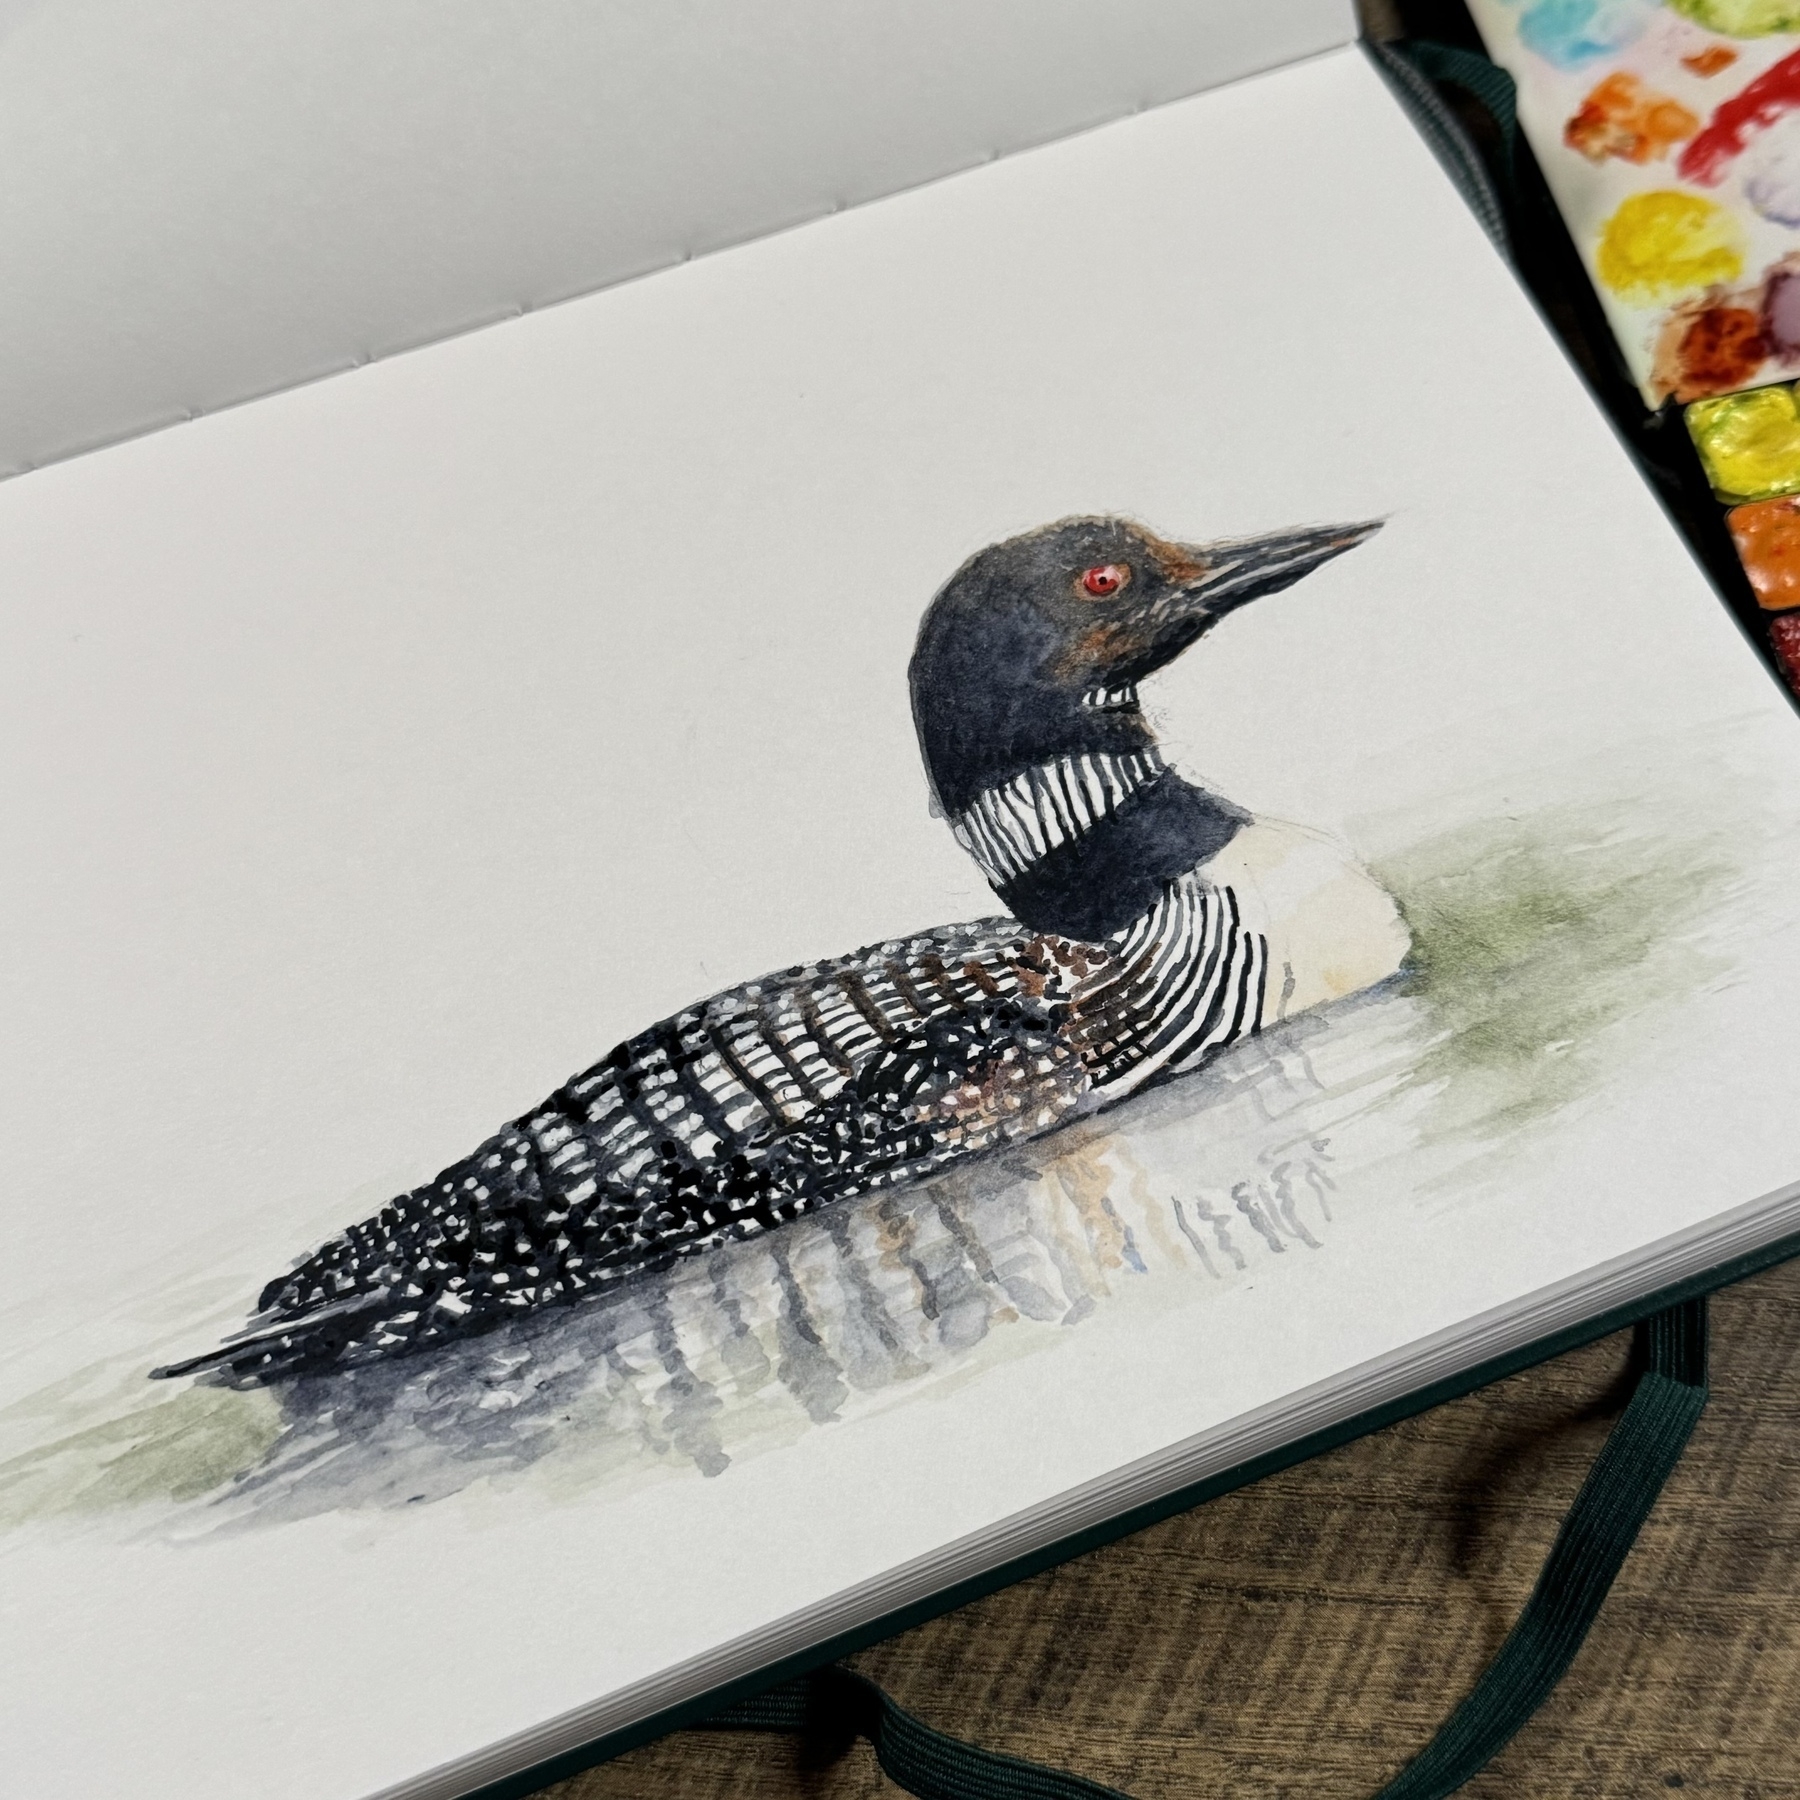 Watercolor painting of a common loon in a Leuchtturm 1917 sketchbook, showing the bird with its distinctive black head, white-striped neck, and checkered back, partially submerged in water with reflections visible.